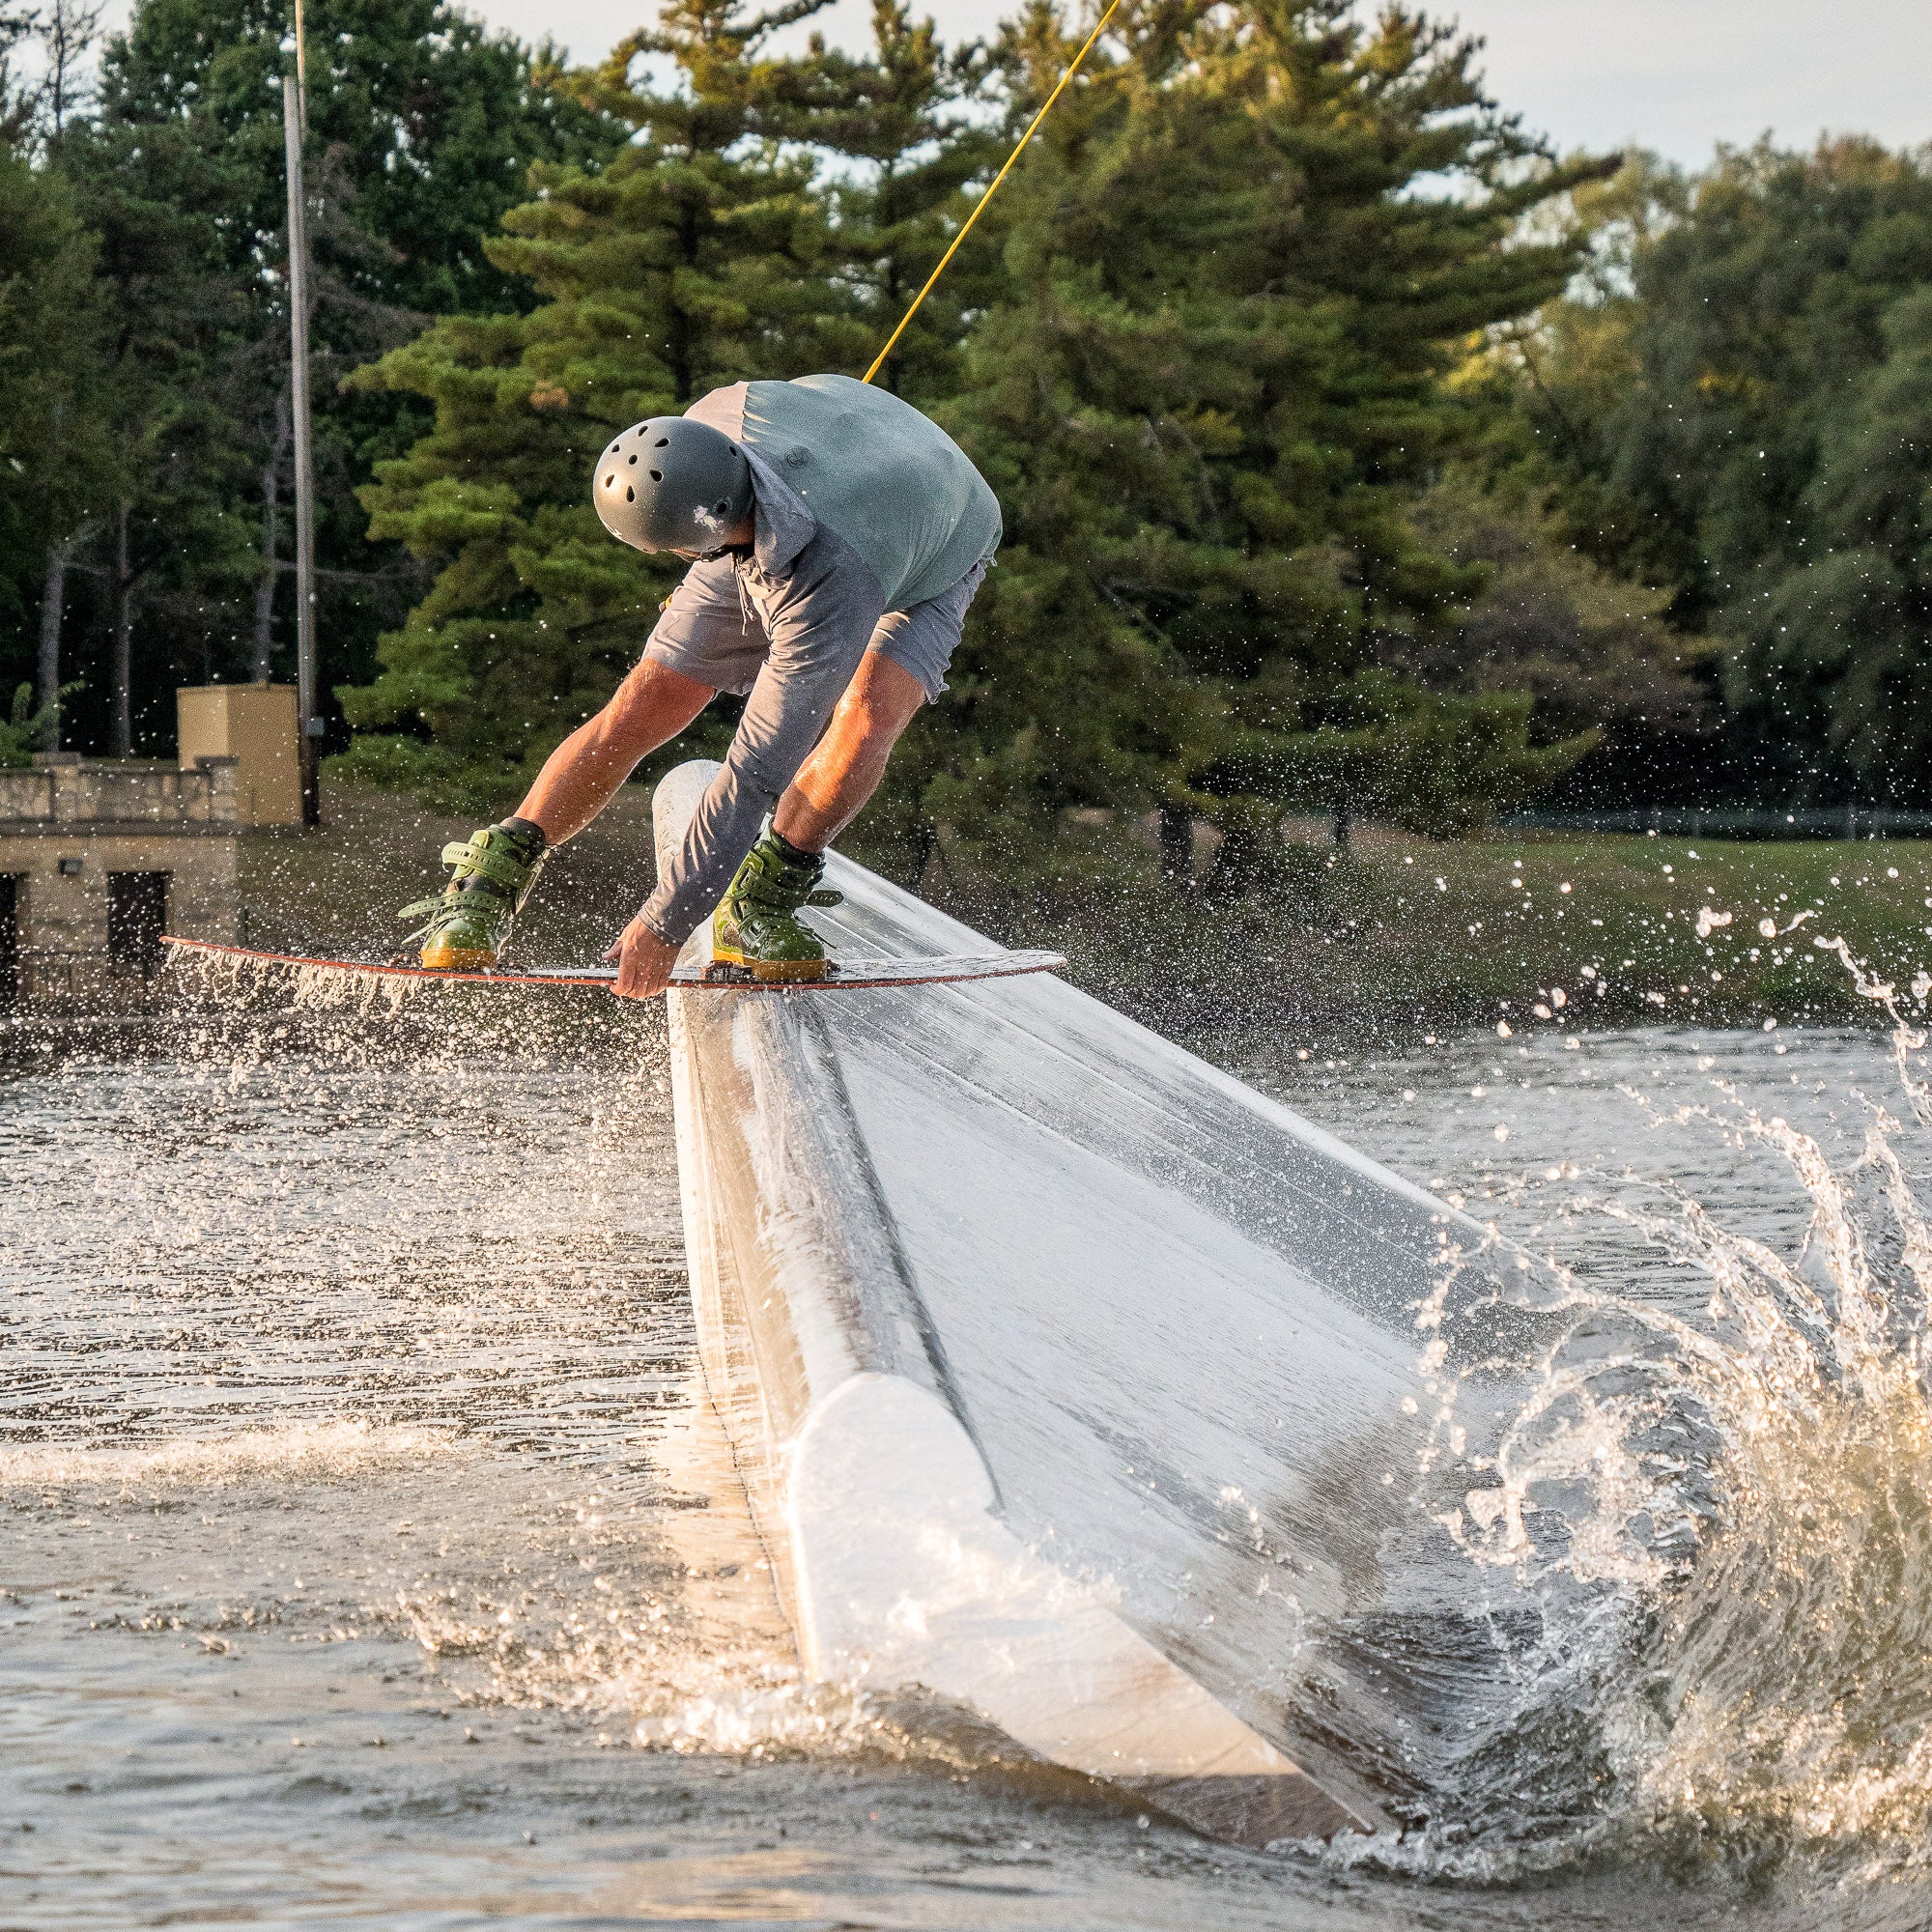 West Rock Wake Park's Full Size Cable